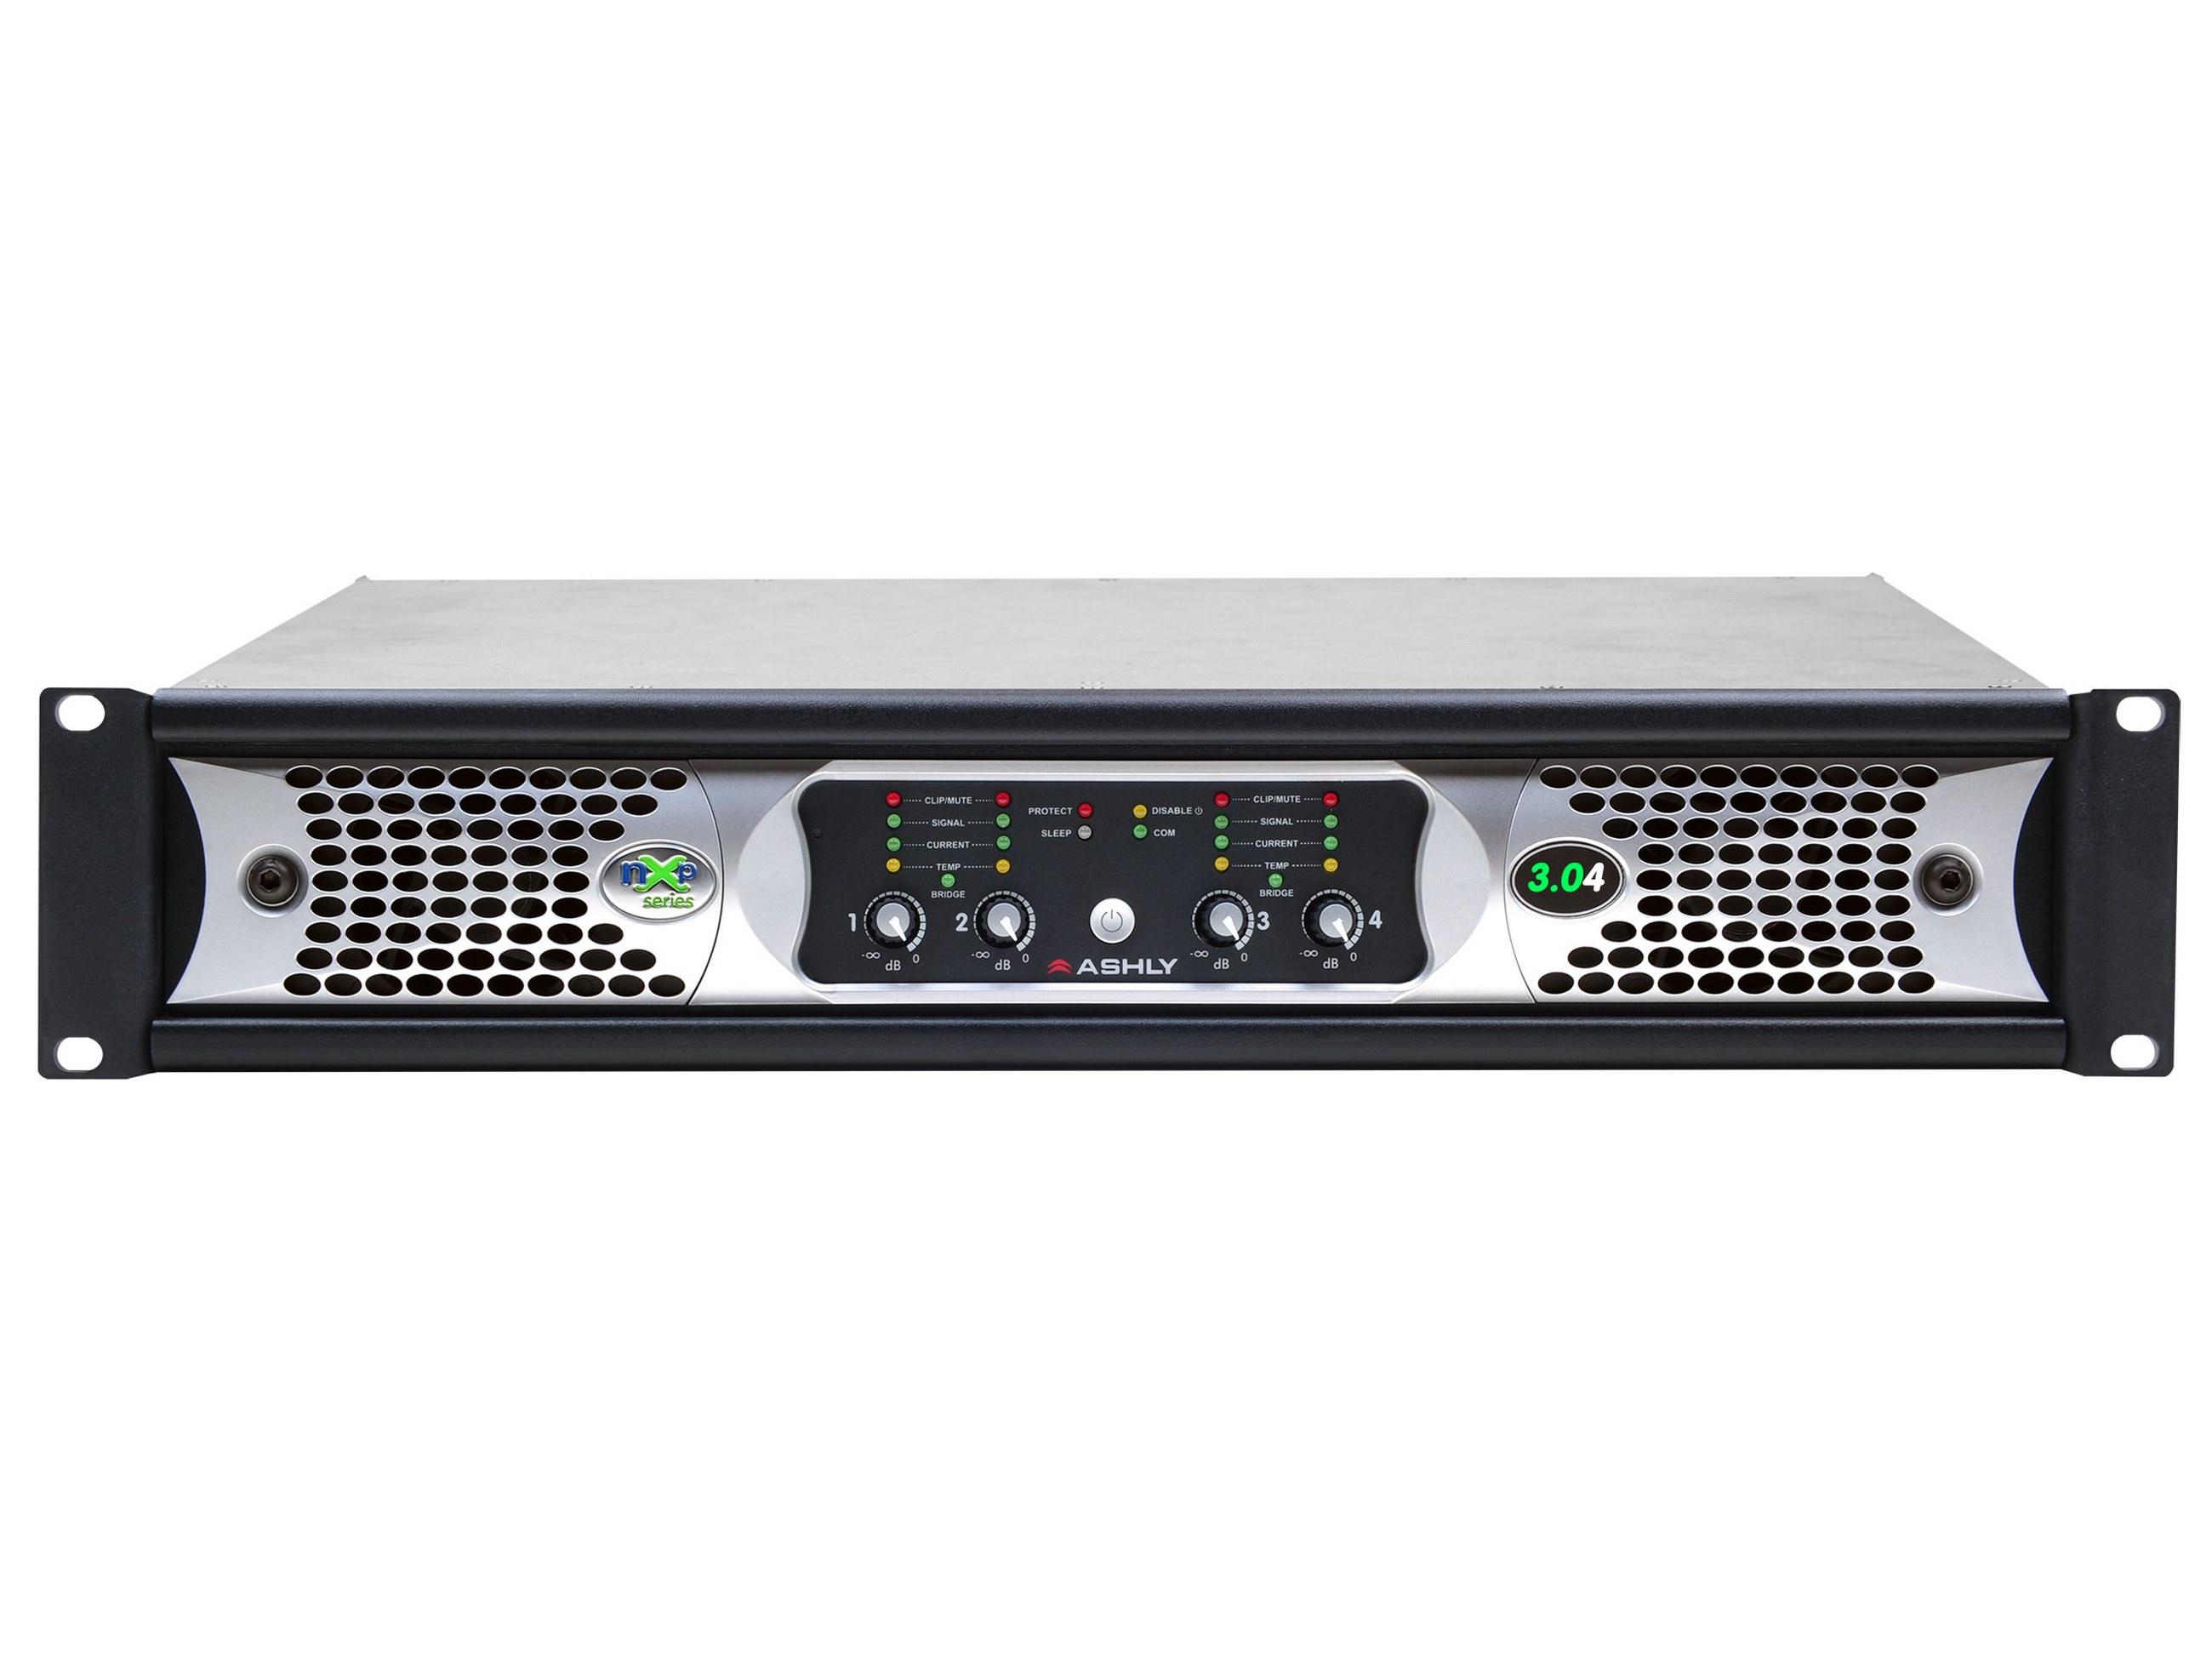 nXp3.04d 4x 3000 Watts/2 Ohms Network Power Amplifier with Protea DSP and OPDante Option Card by Ashly